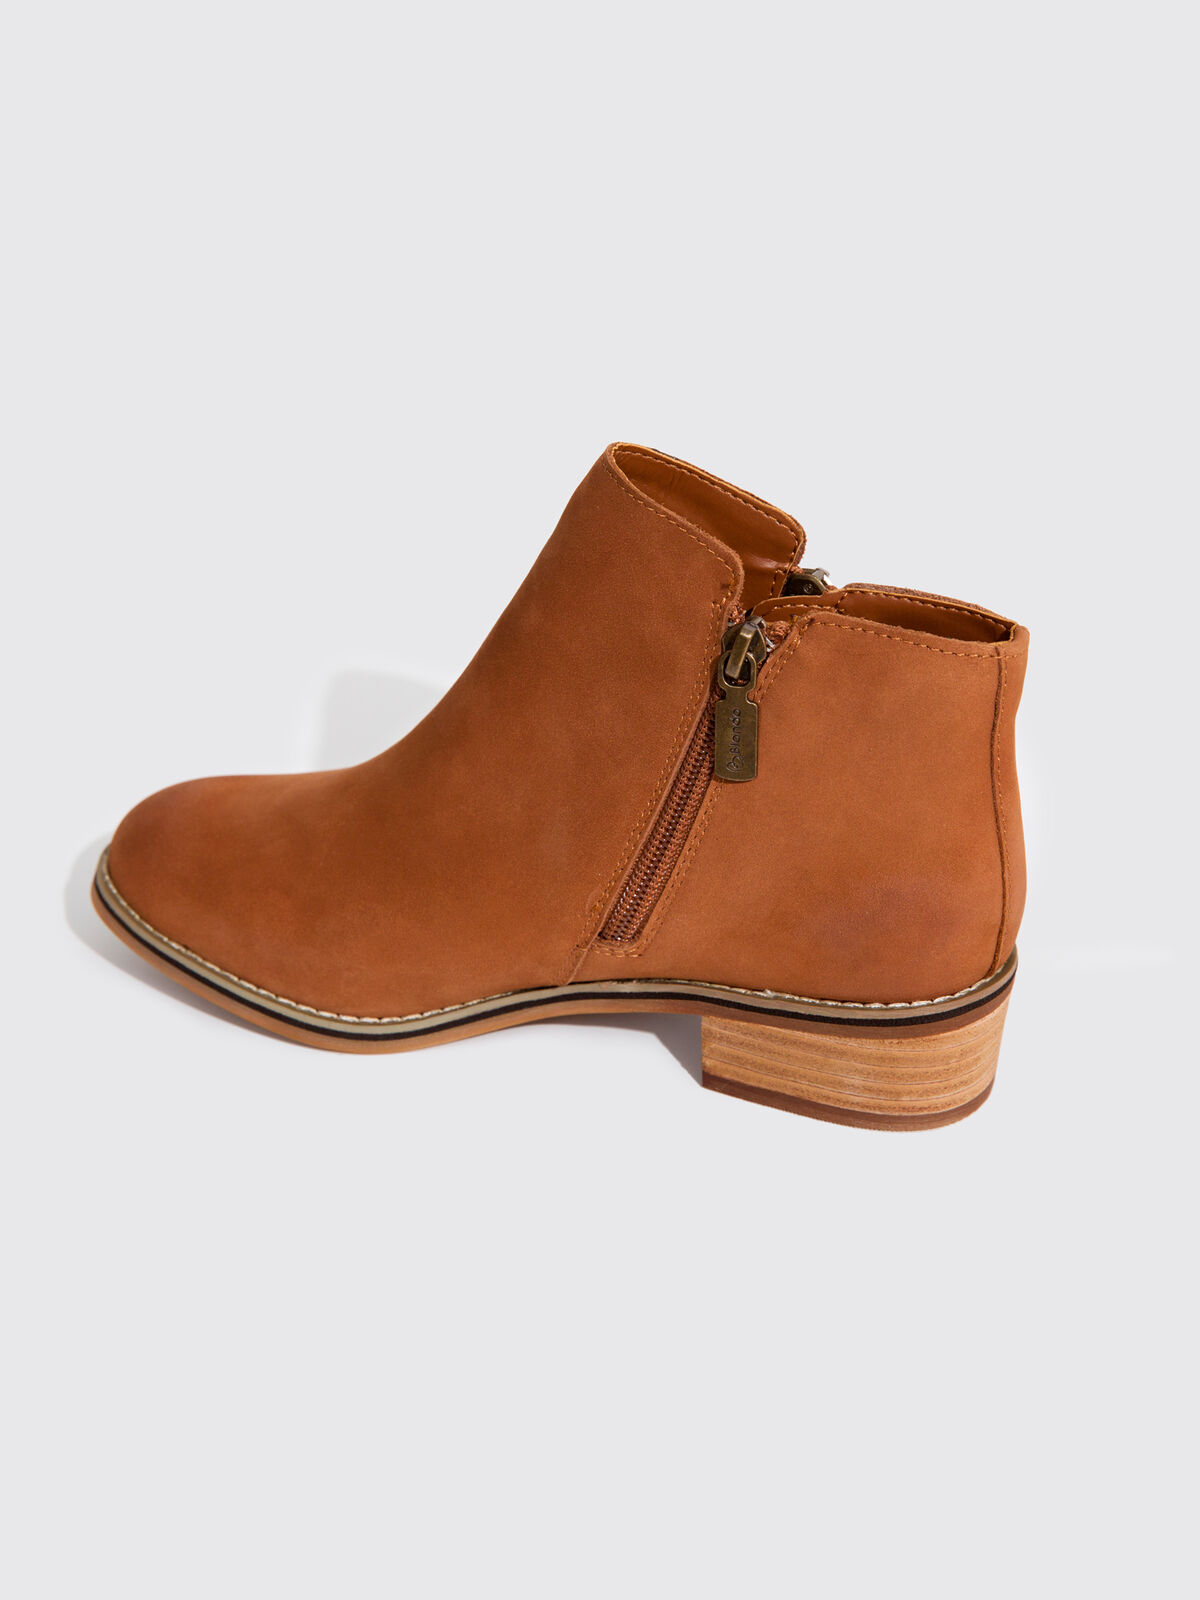 Blondo Liam Ankle Boot